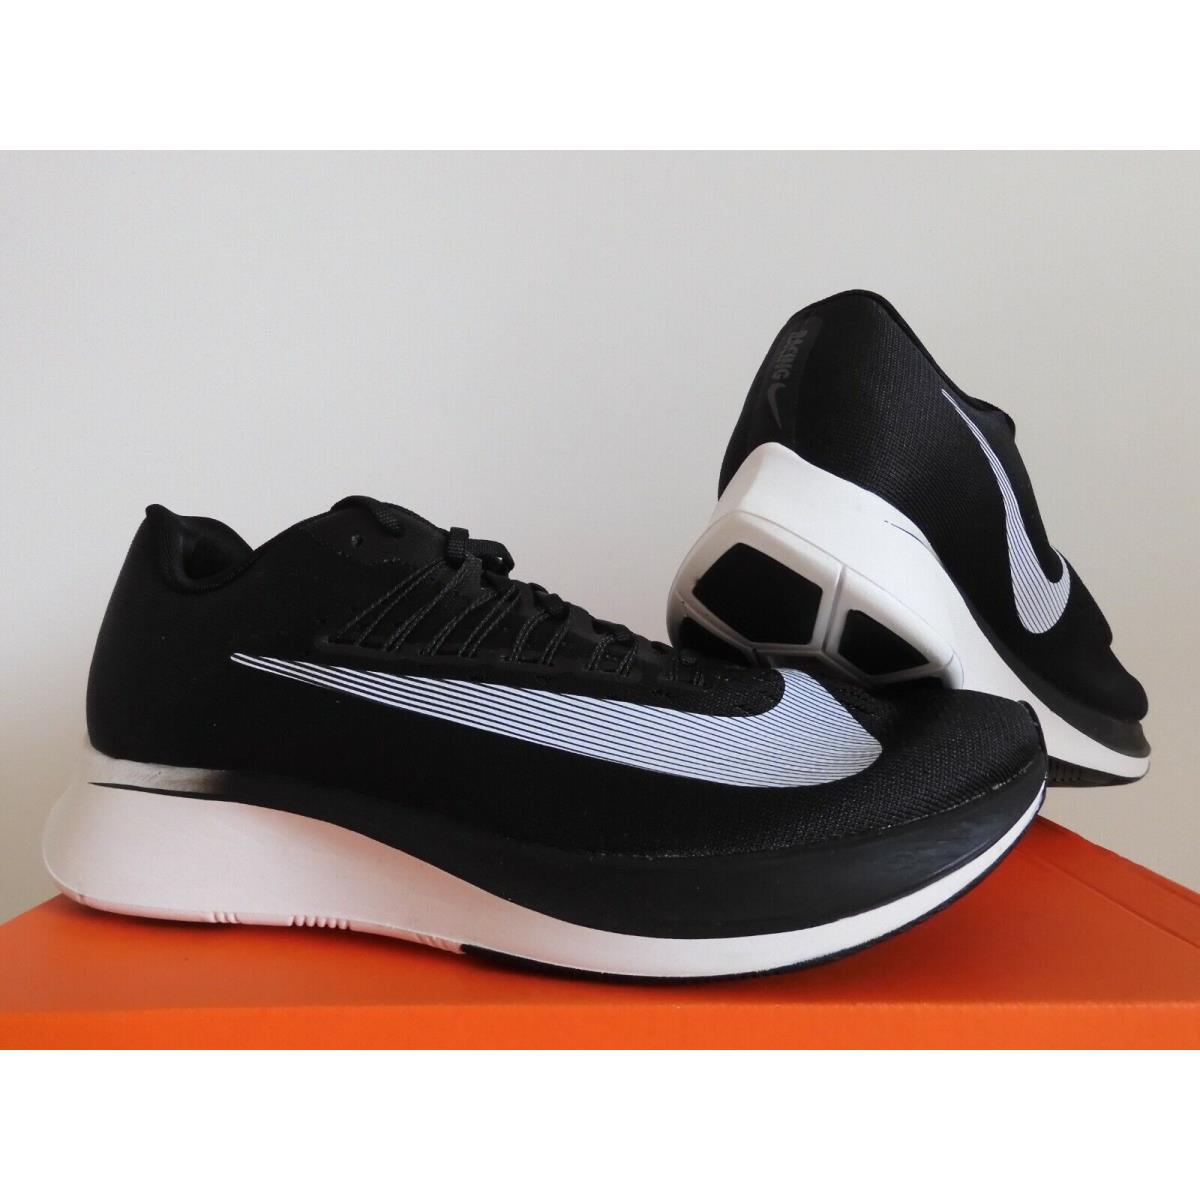 Nike shoes Zoom Fly - Black 0